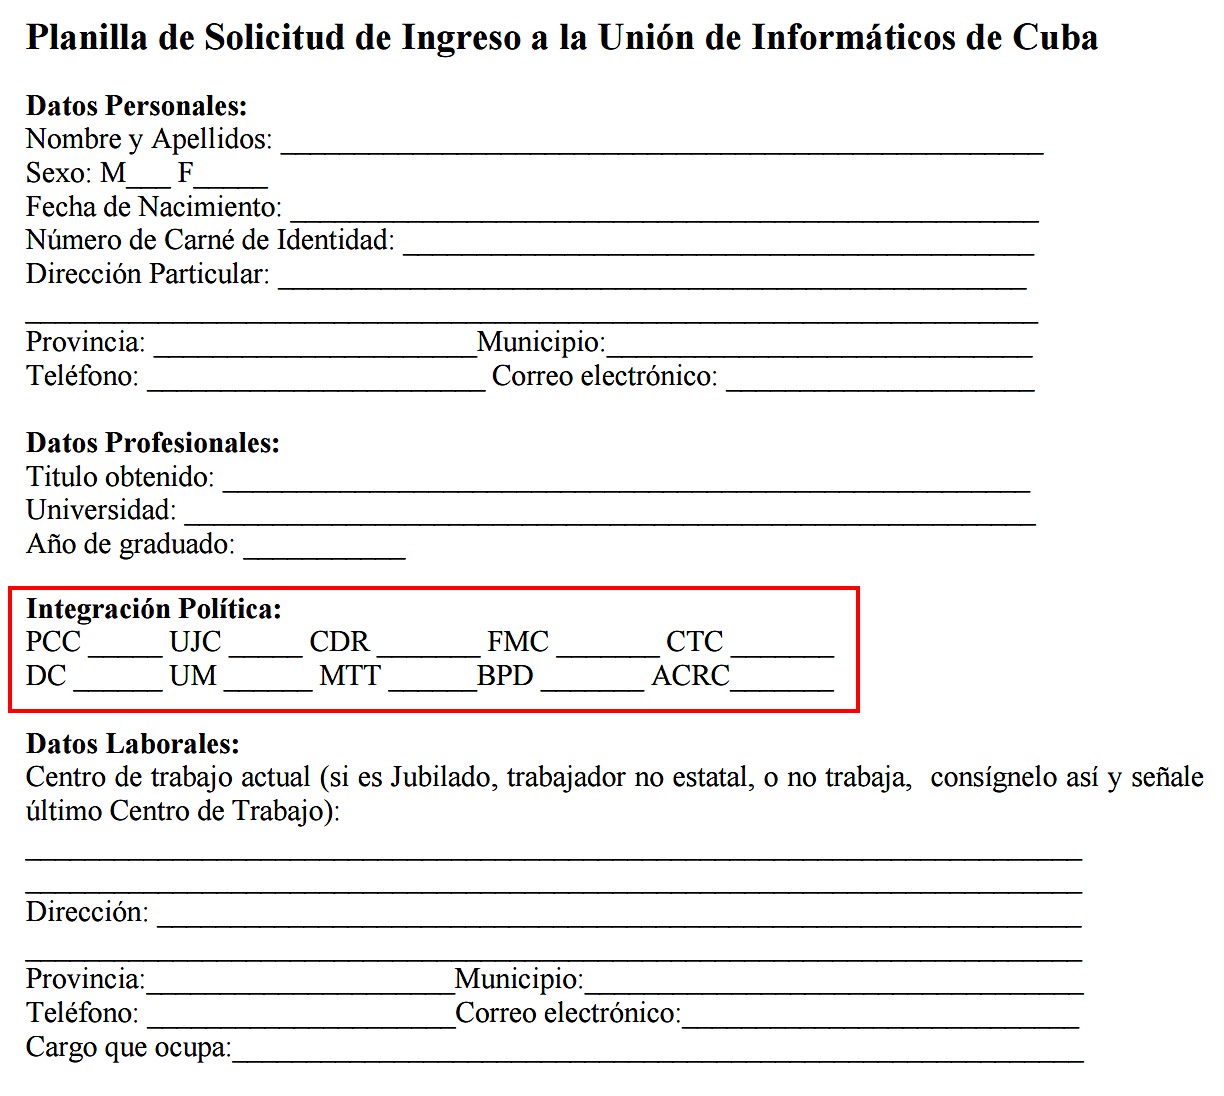 The UIC membership application asks for political affiliations (red added)